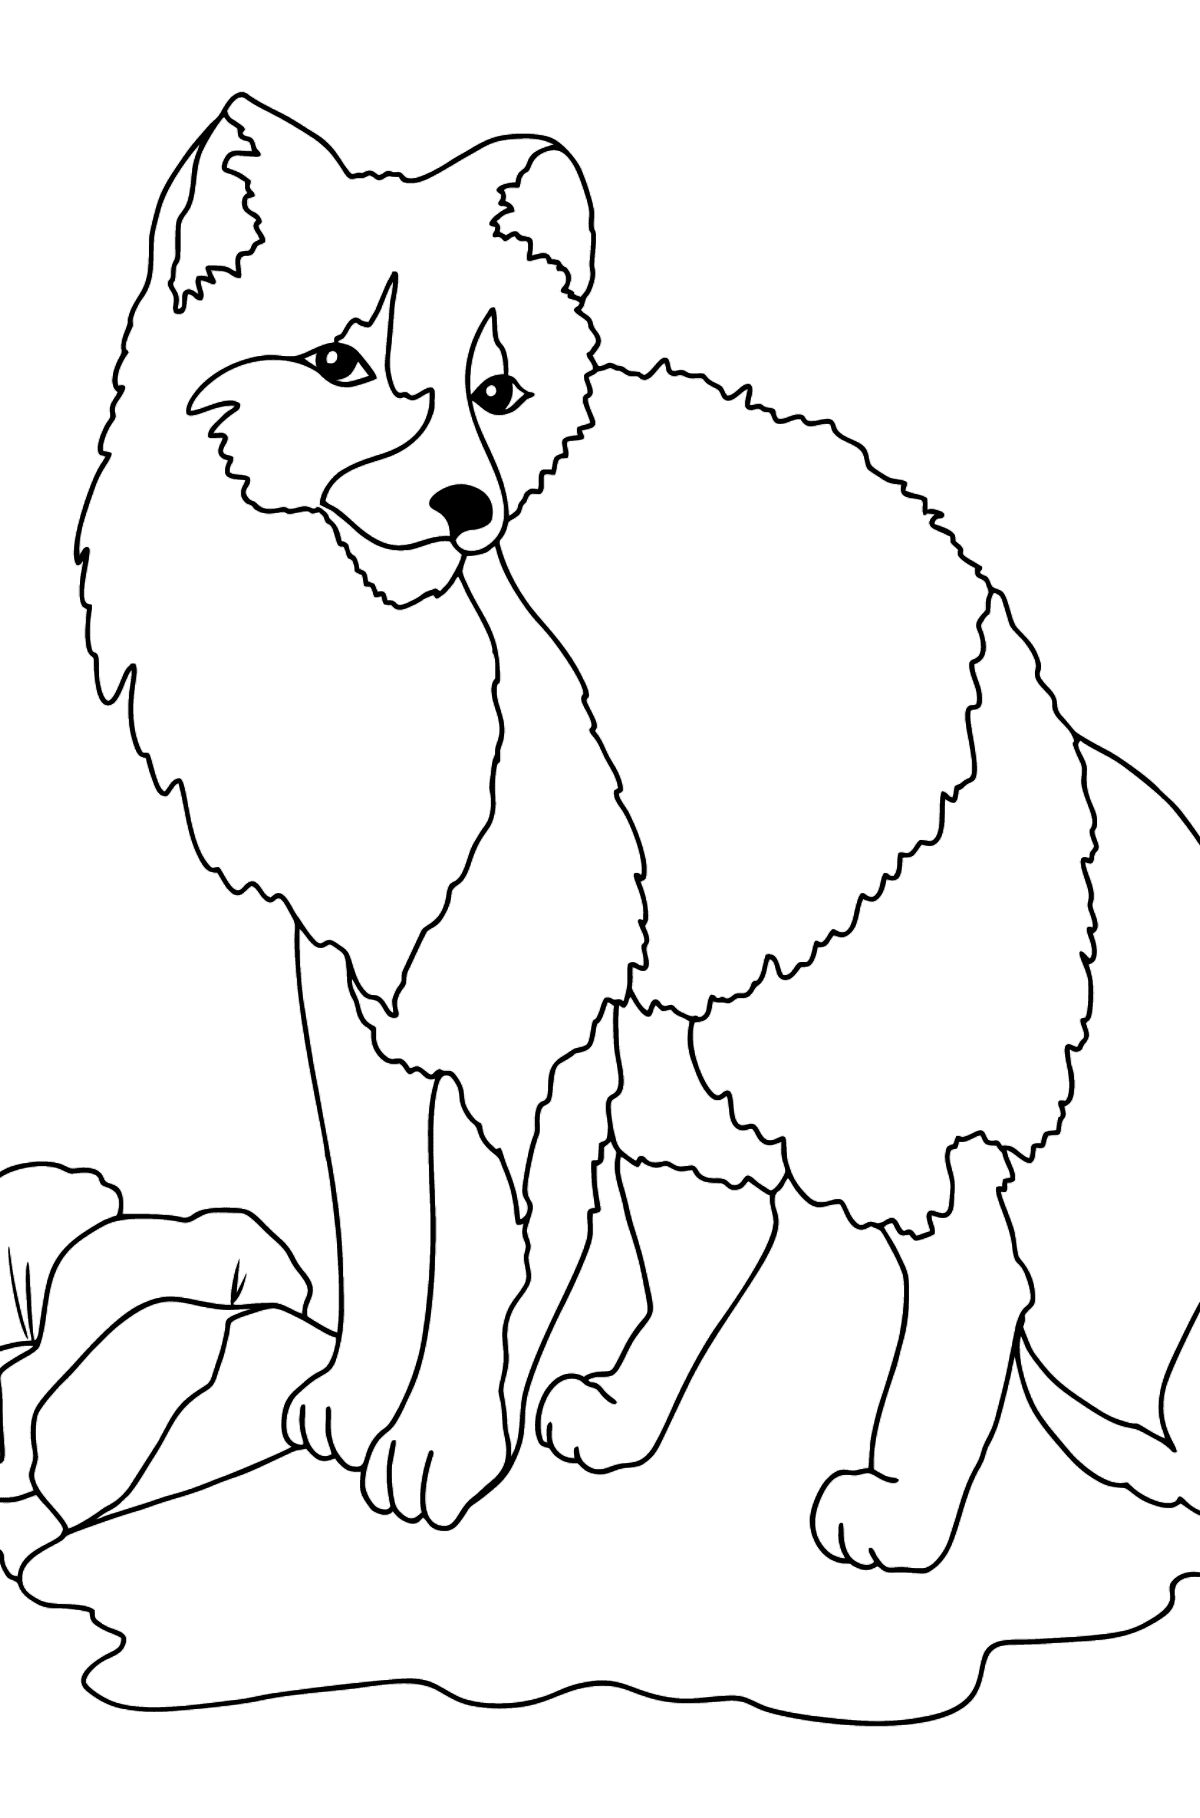 Coloring Page - A White Arctic Fox - Coloring Pages for Kids